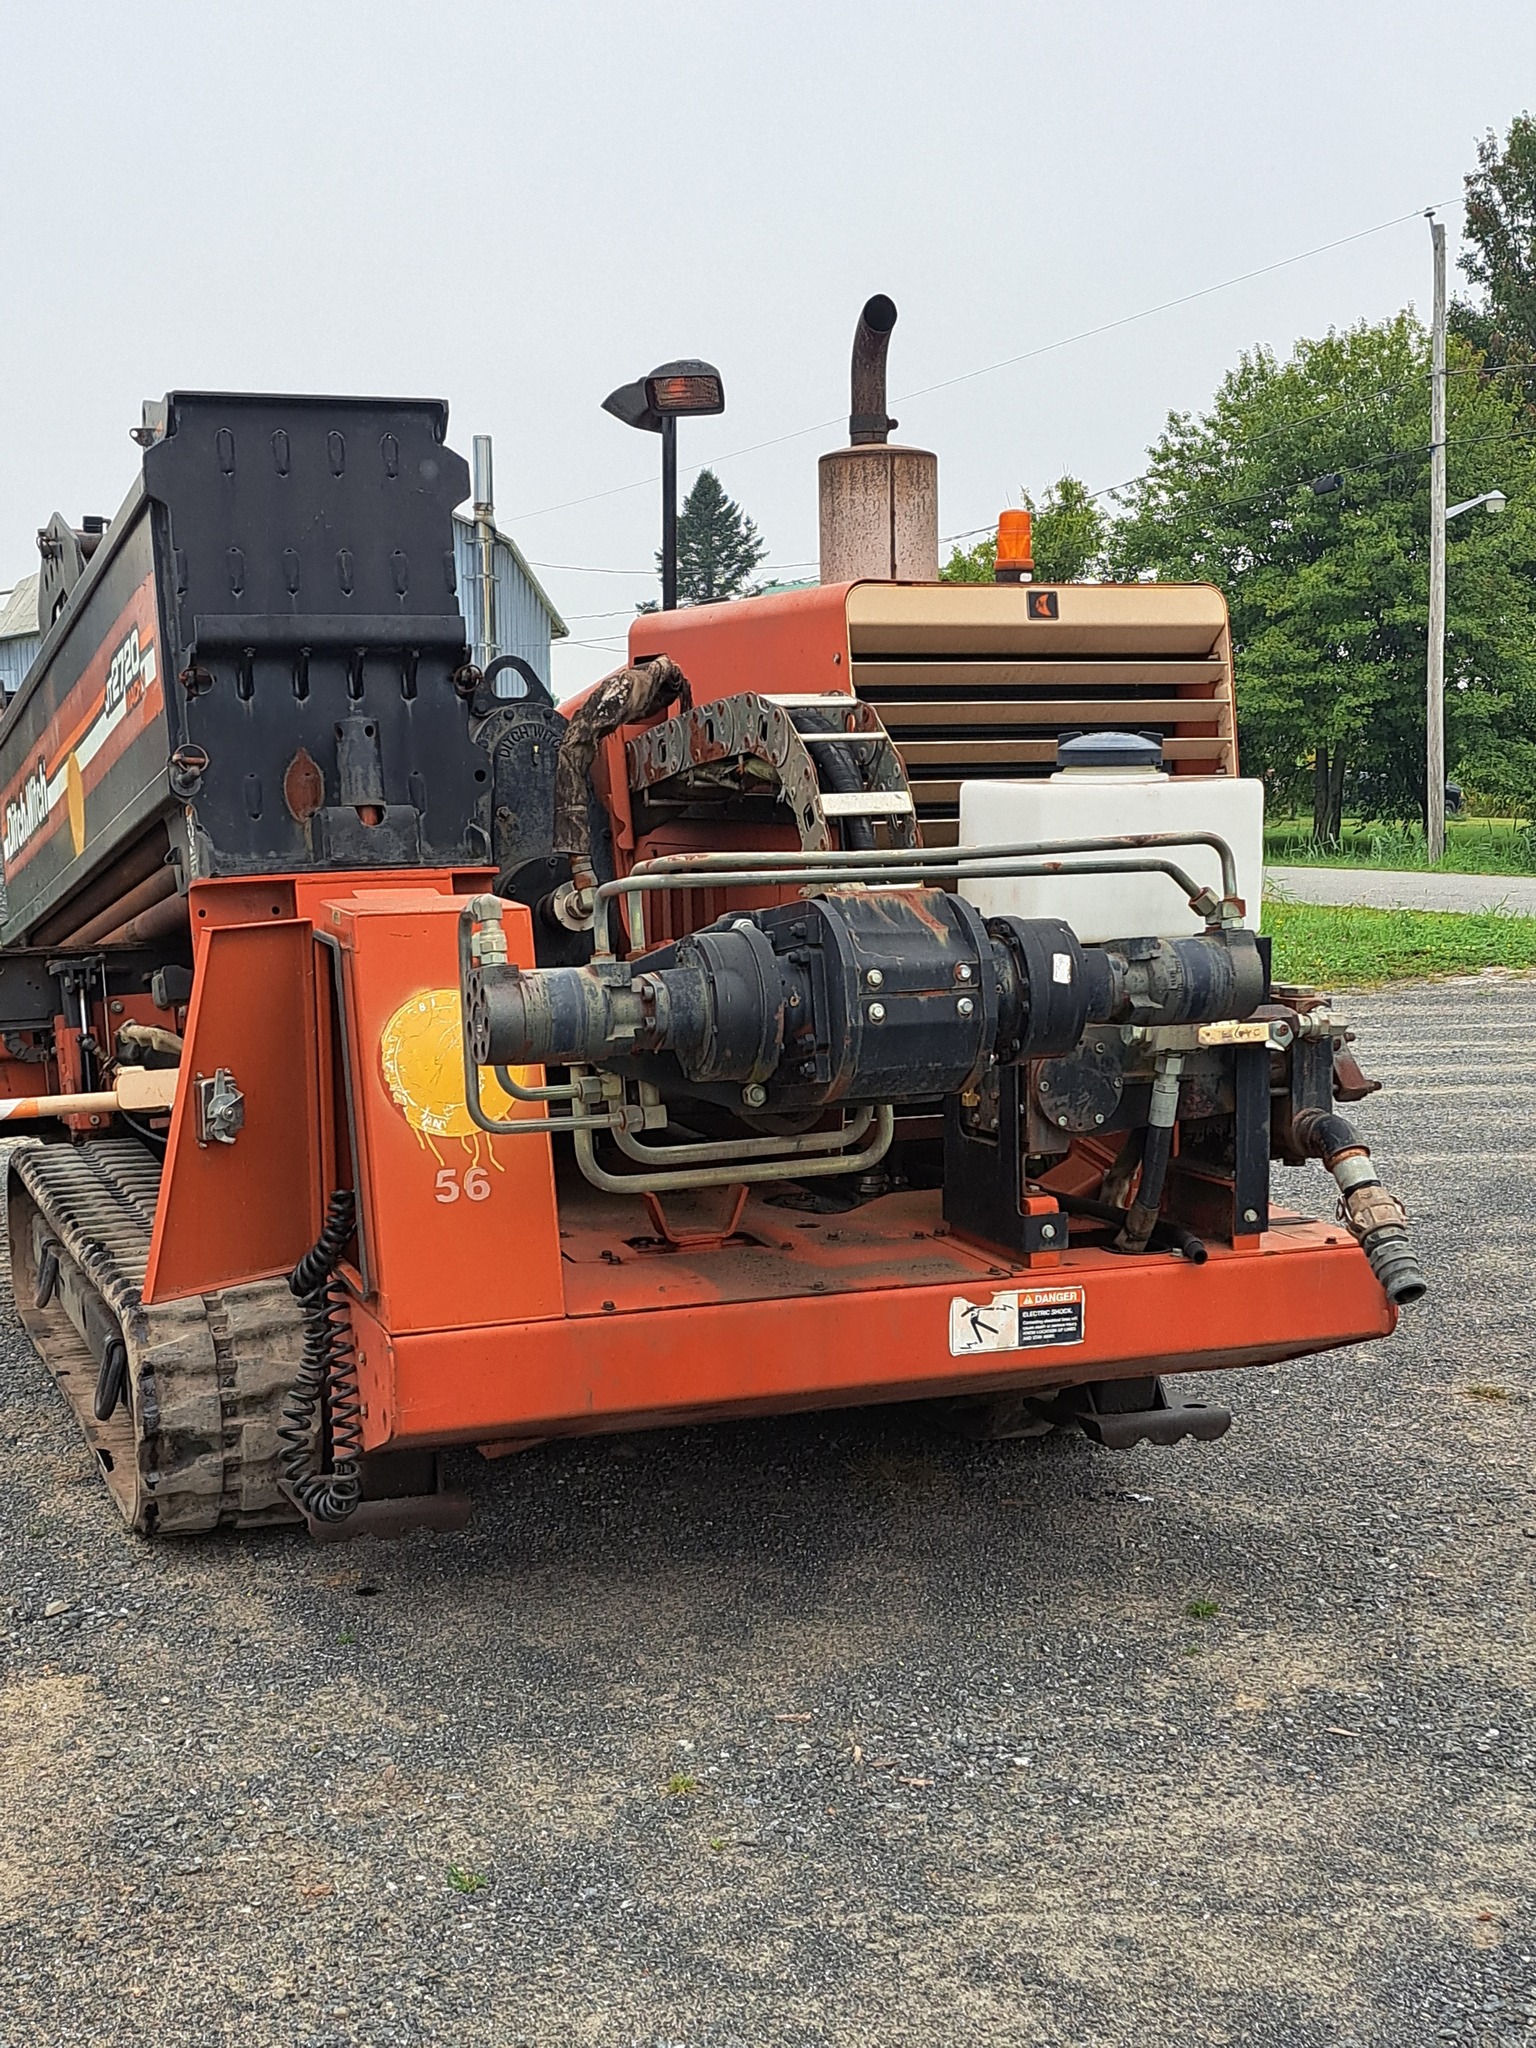 Foreuse ditch Witch-3.jpg